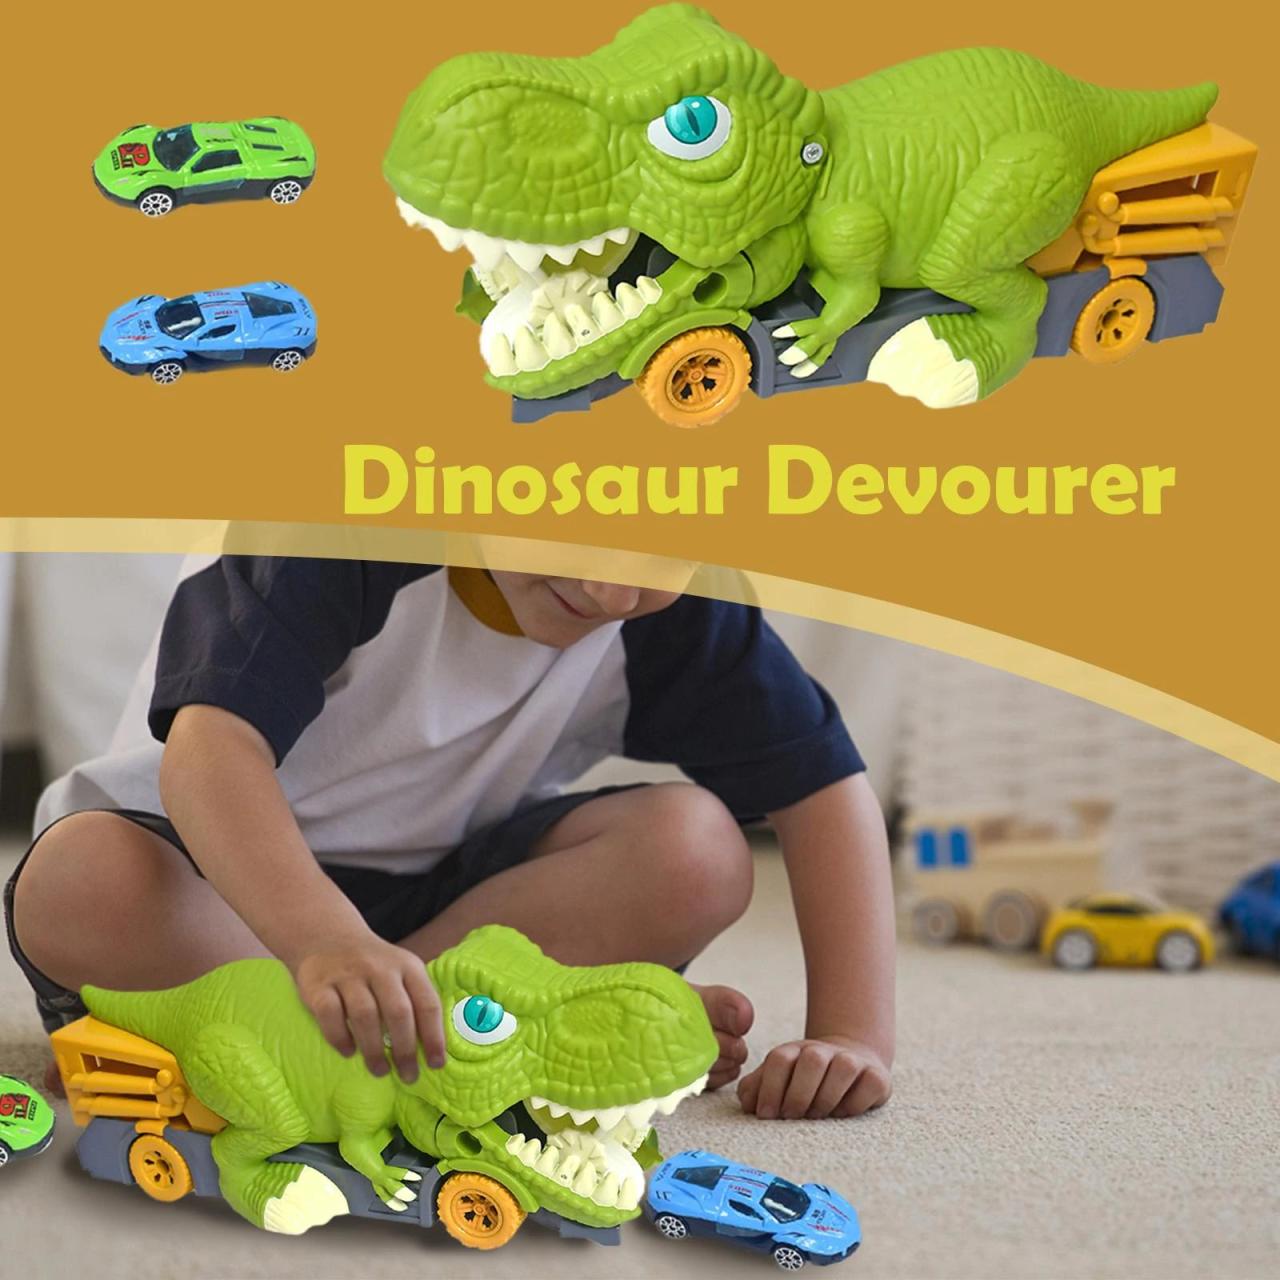 Early Christmas Sale - 50% OFF Dinosaur Devouring Truck